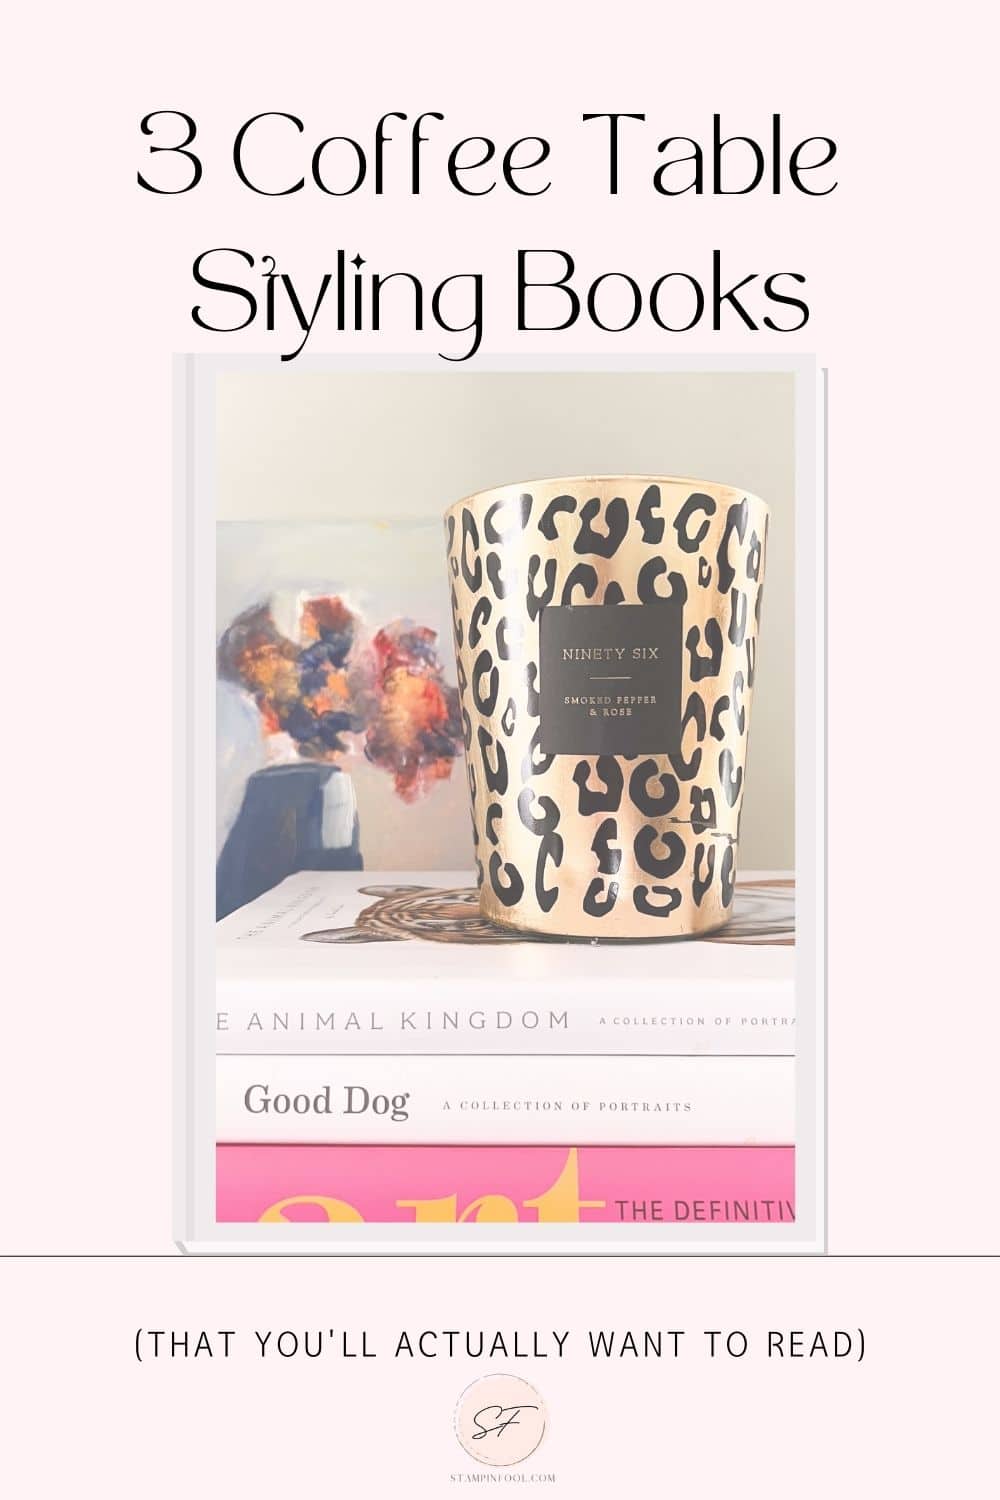 3 Coffee Table Styling Books (1)